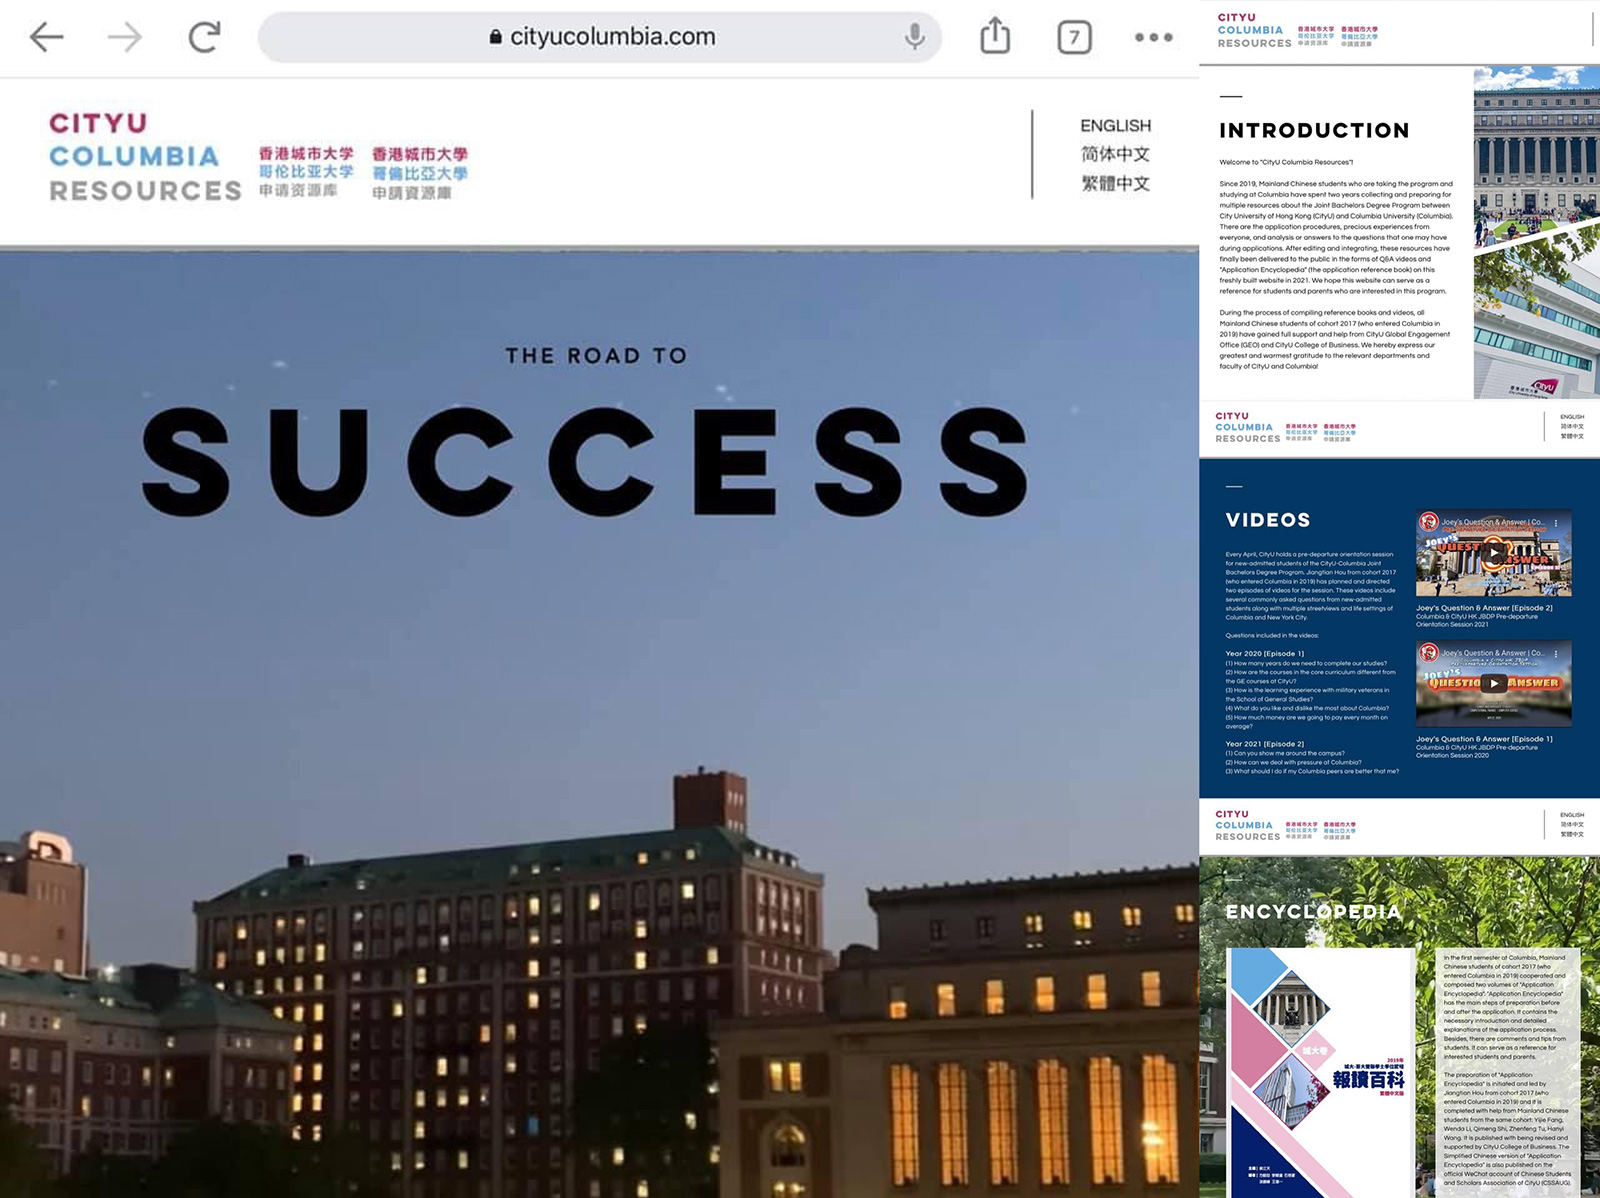 “CityU Columbia Resources” website provides booklets, videos, and more related to the Joint Program in three languages.